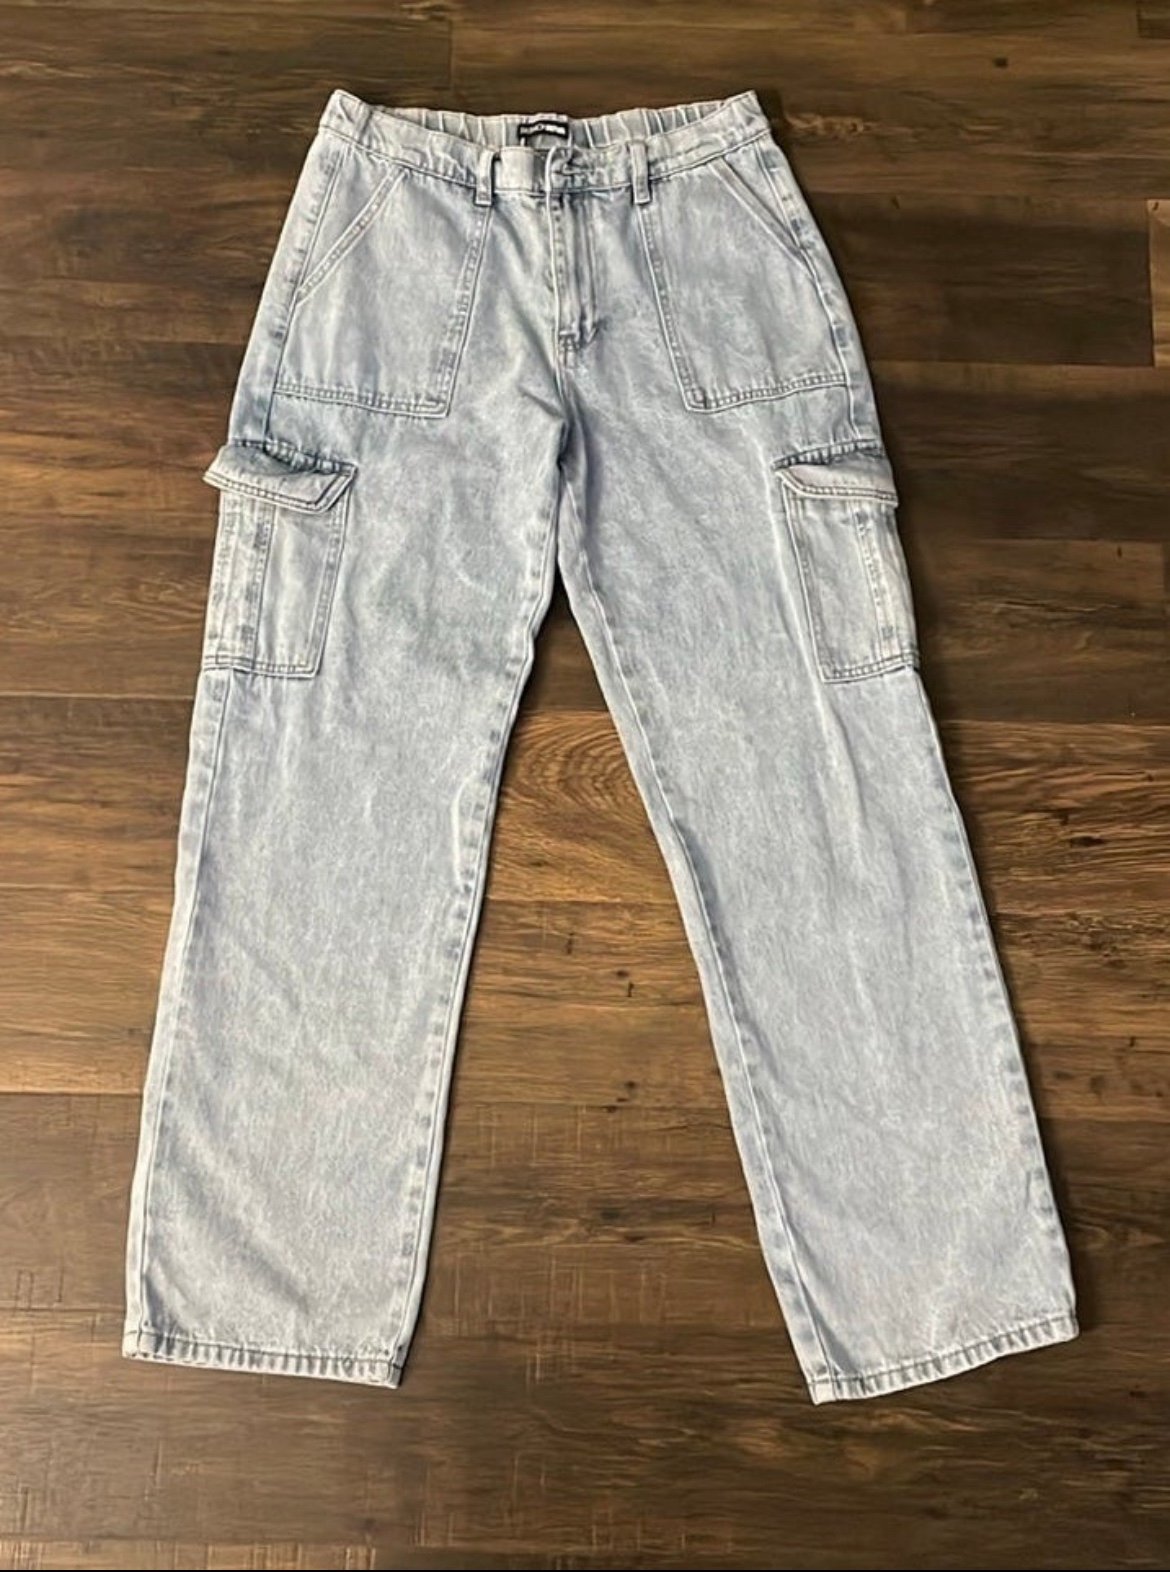 large selection Cargo jeans osGCpw3fI on sale